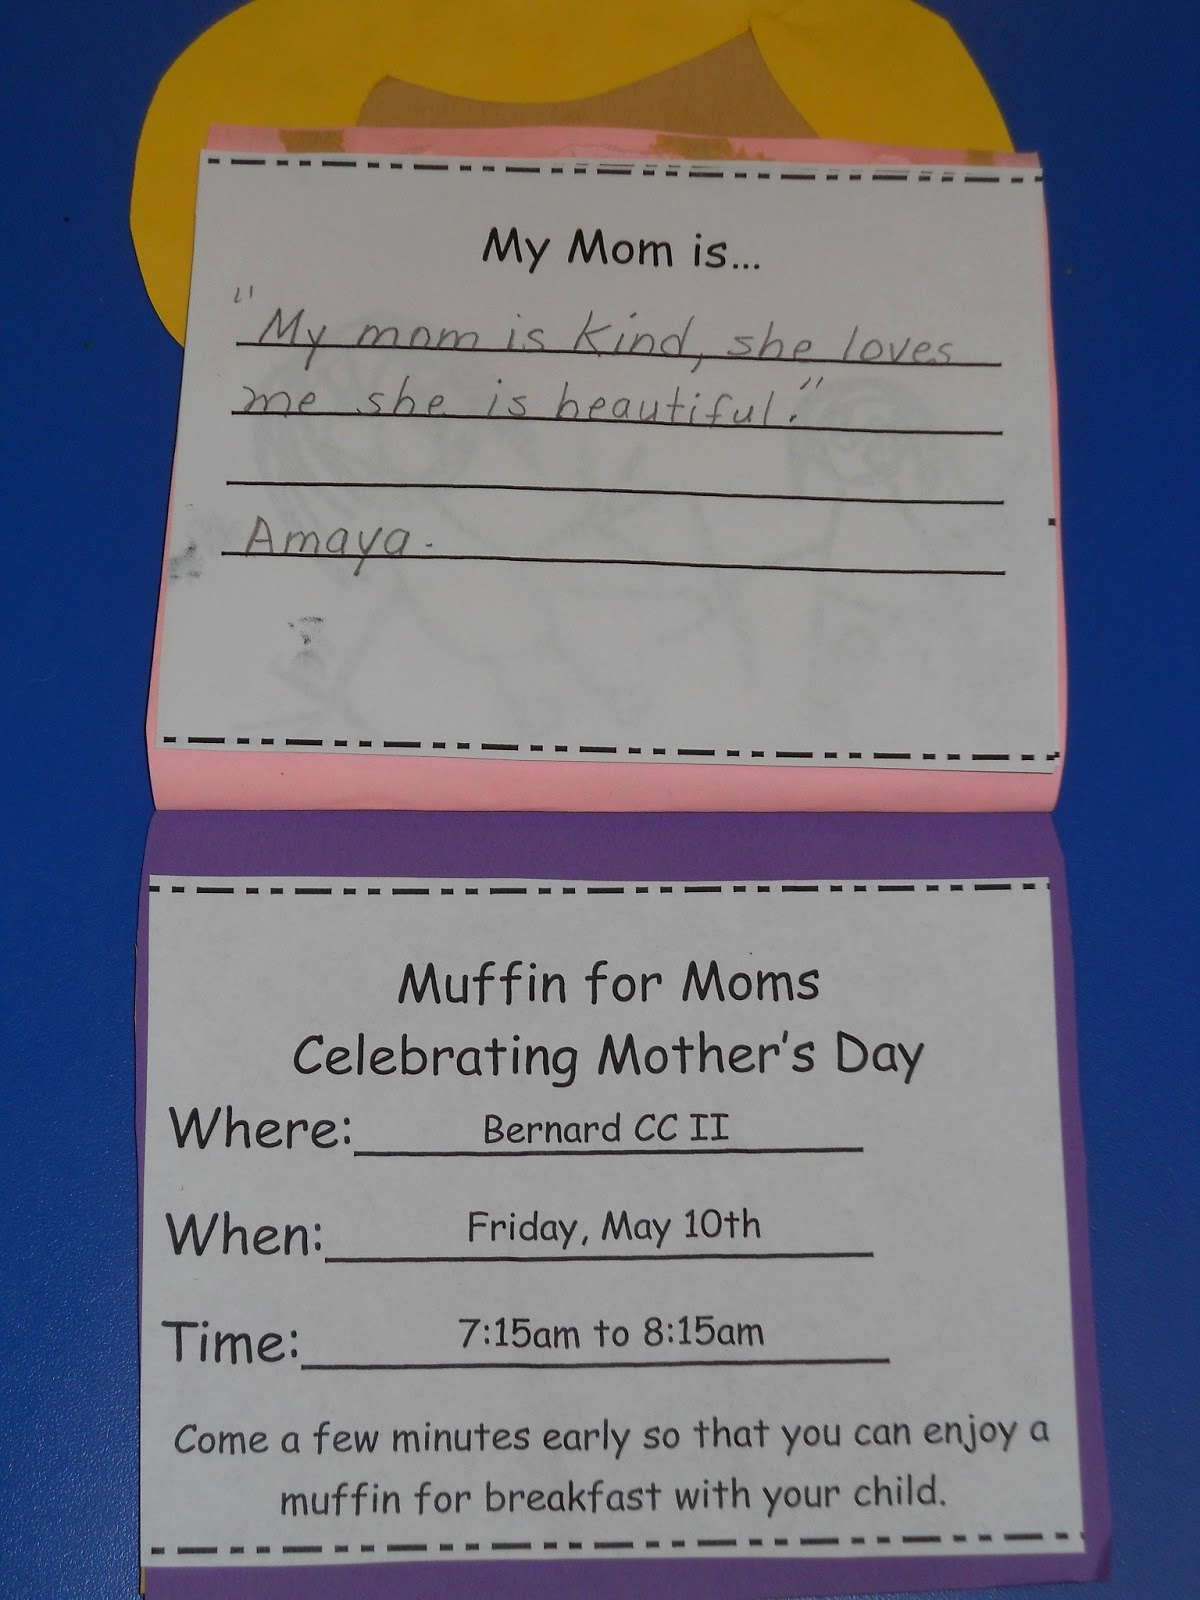 Muffins with Mom Invitation Template Fresh Learning and Teaching with Preschoolers Muffins for Mom